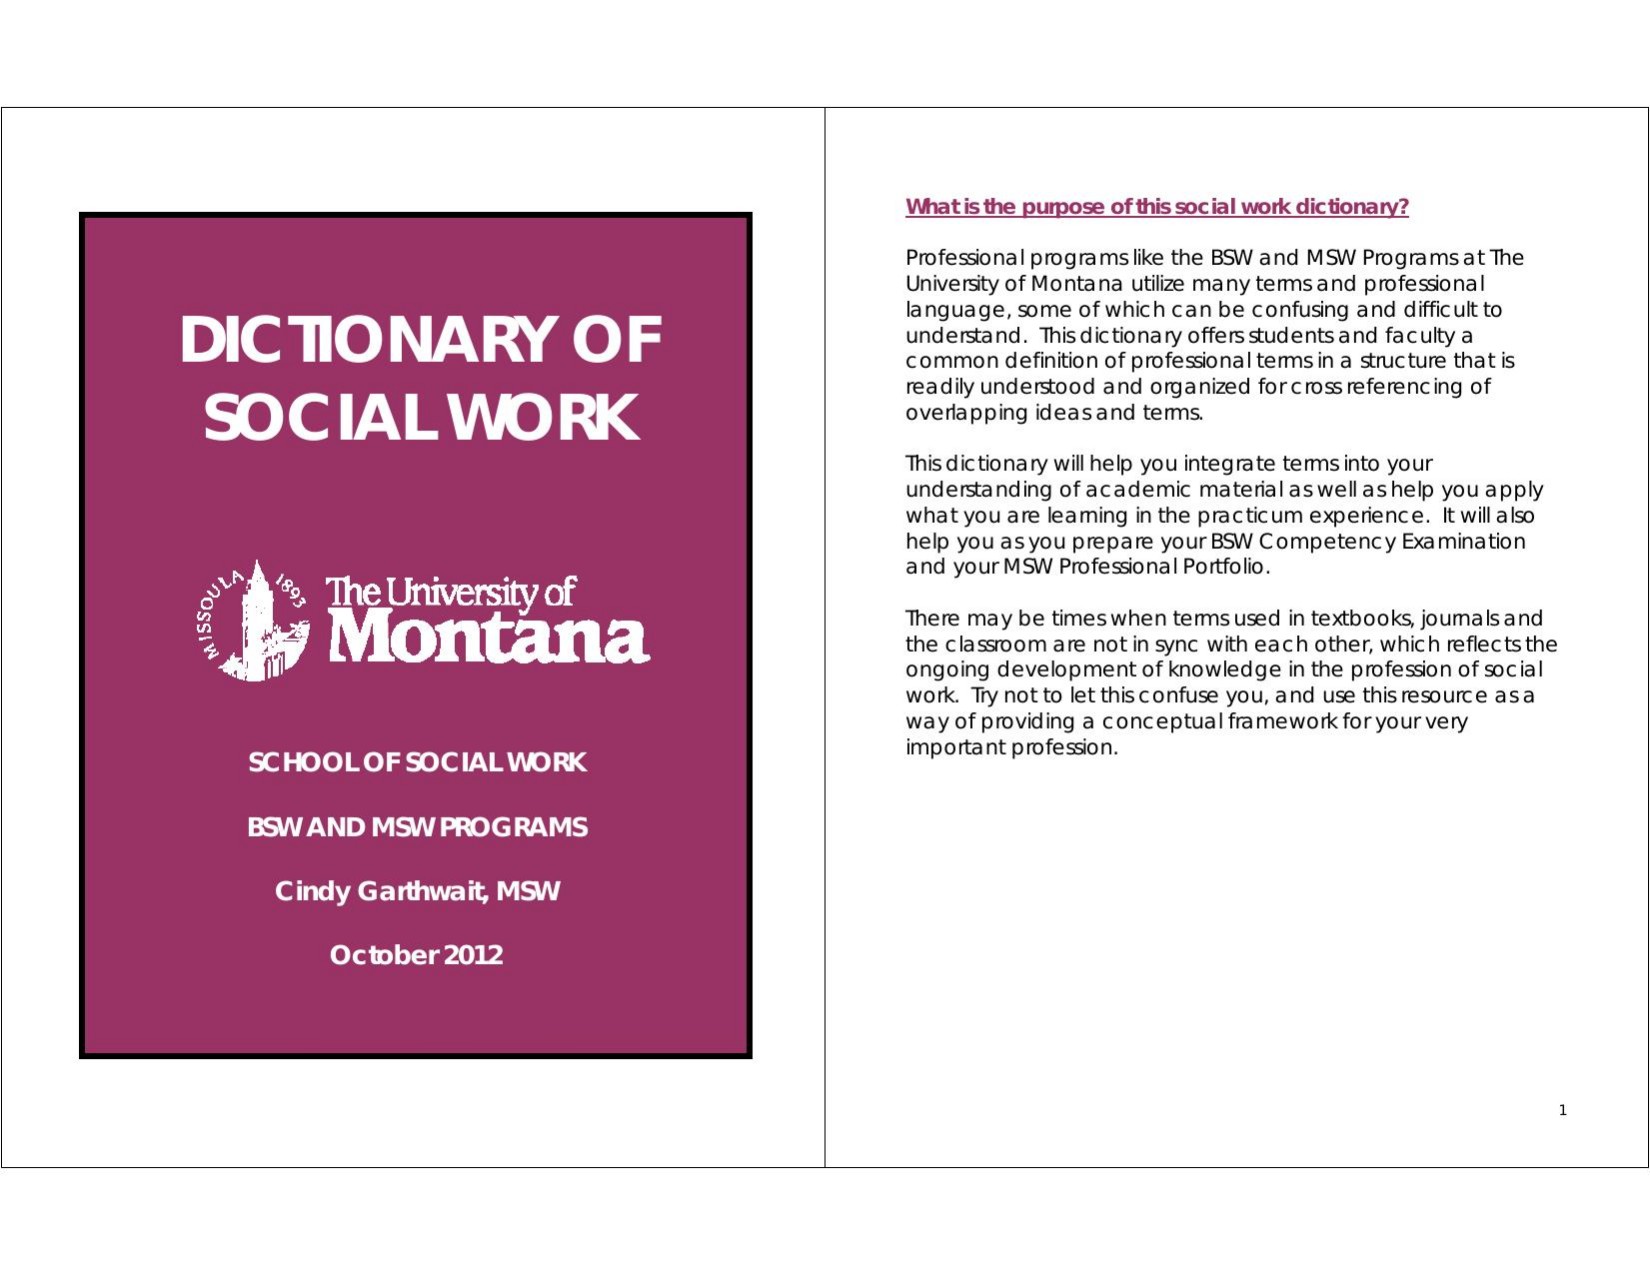 Microsoft Word - Social Work Dictionary_updated 2012-10-23.docx